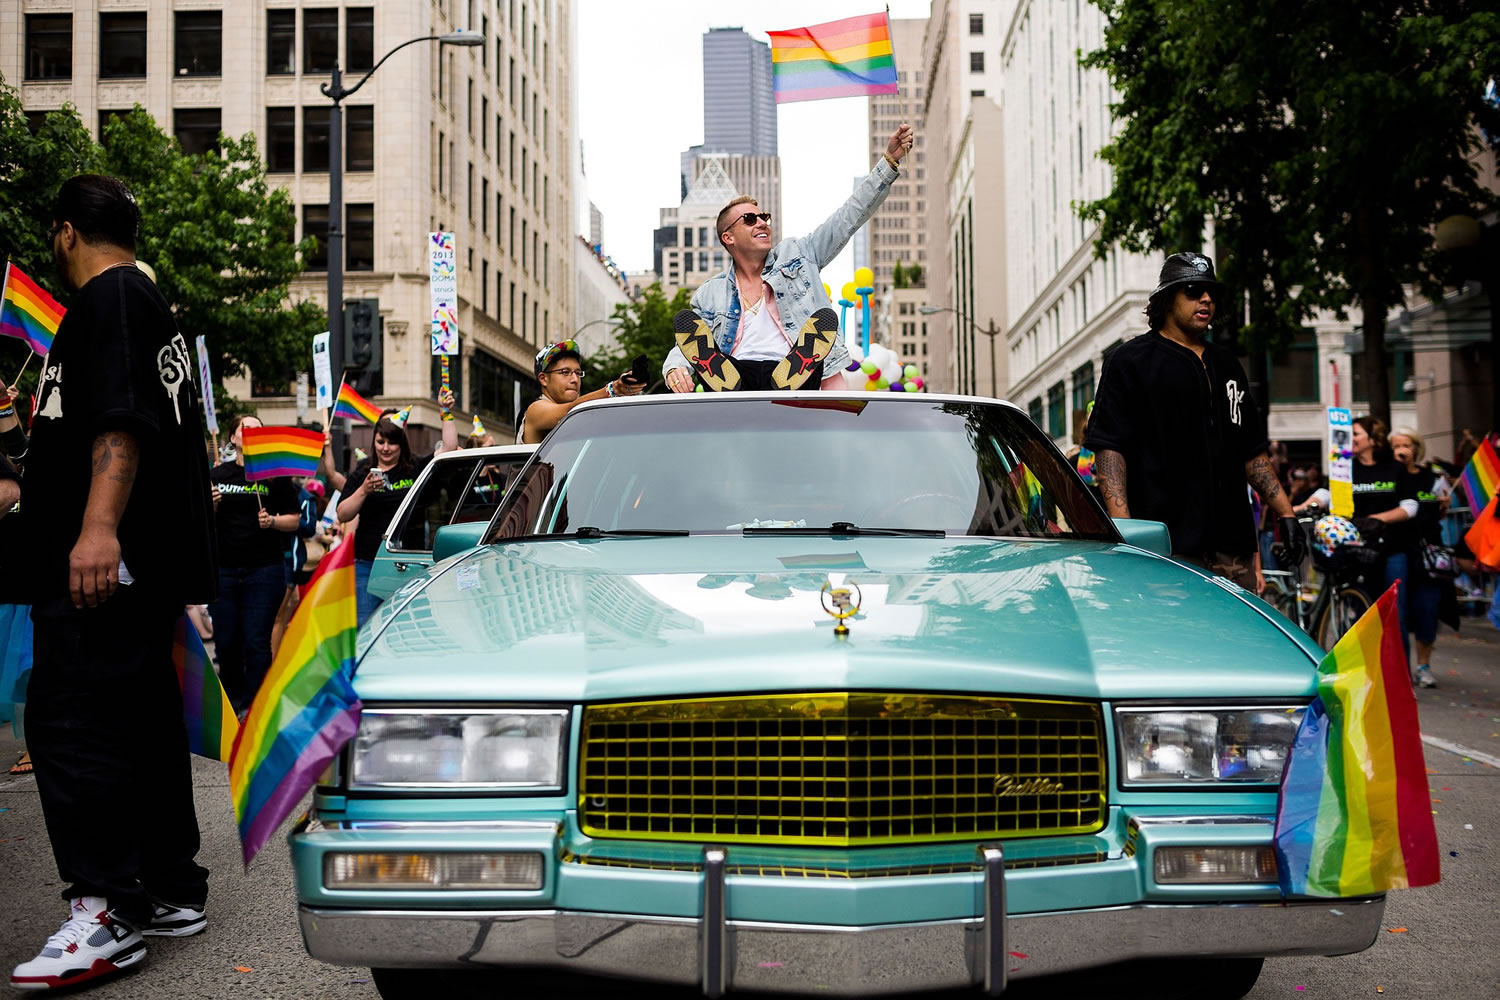 Waving a pride flag, Seattle rap artist Macklemore, center, rides atop his Cadillac through the 40th annual Seattle Pride Parade on Sunday in Seattle.